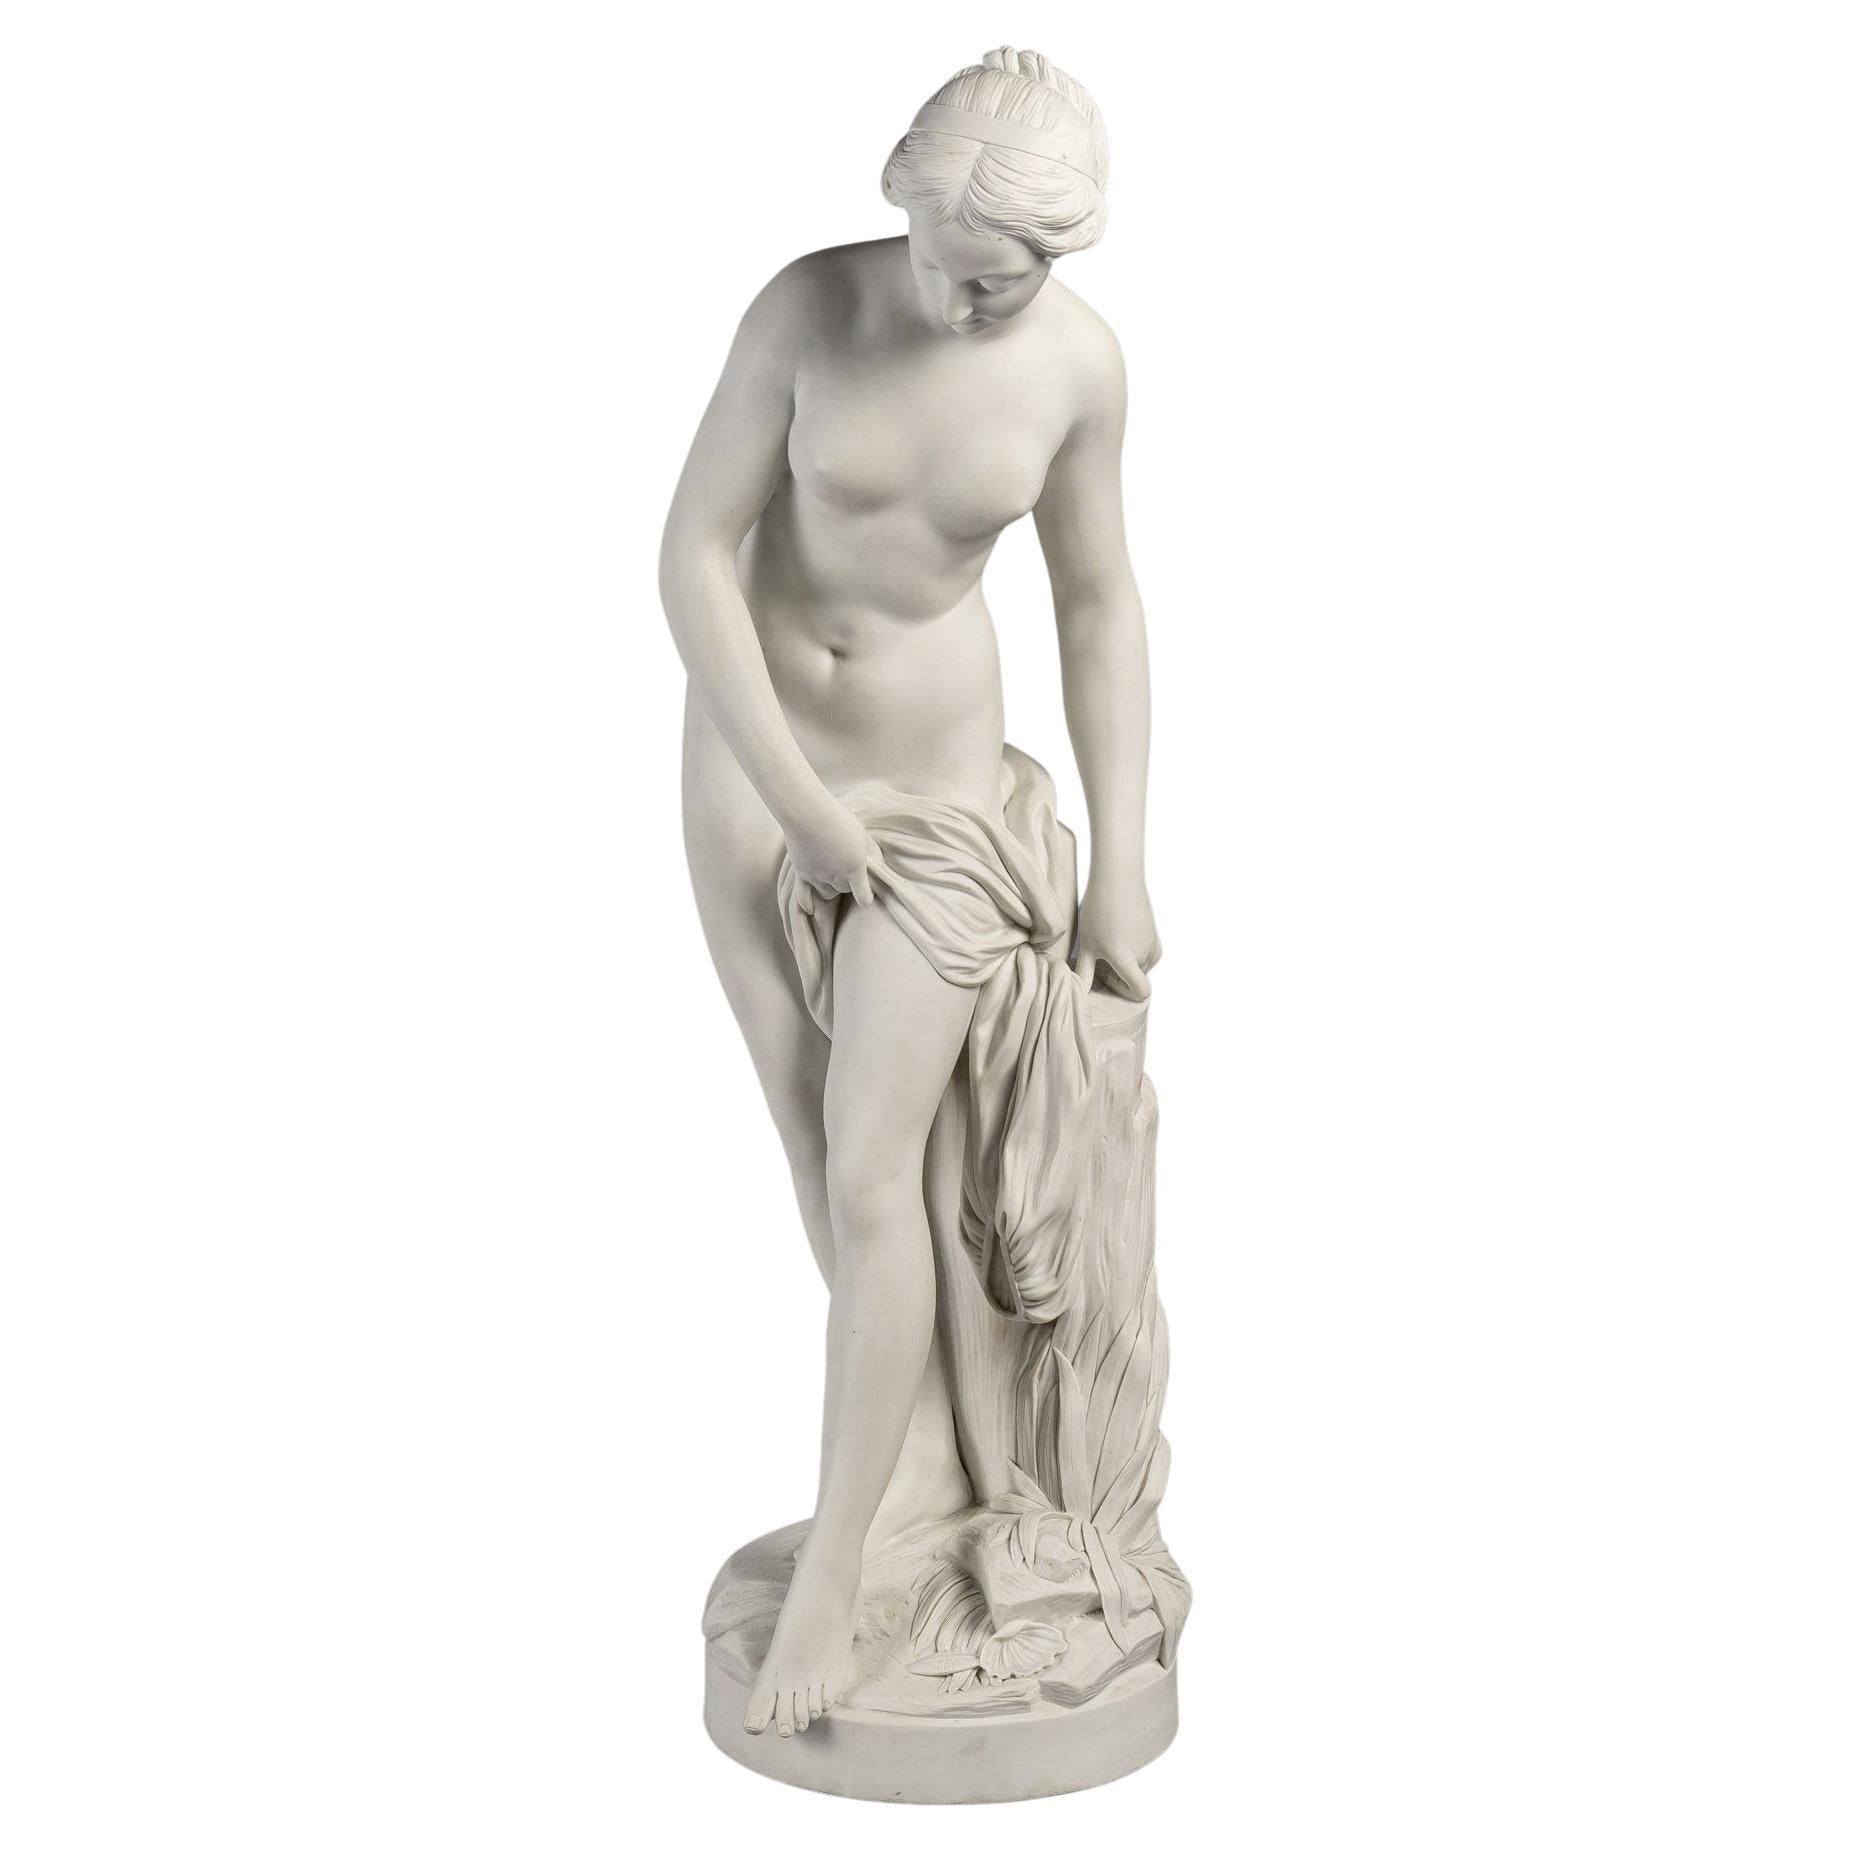 La baigneuse in biscuit by Étienne Maurice Falconet